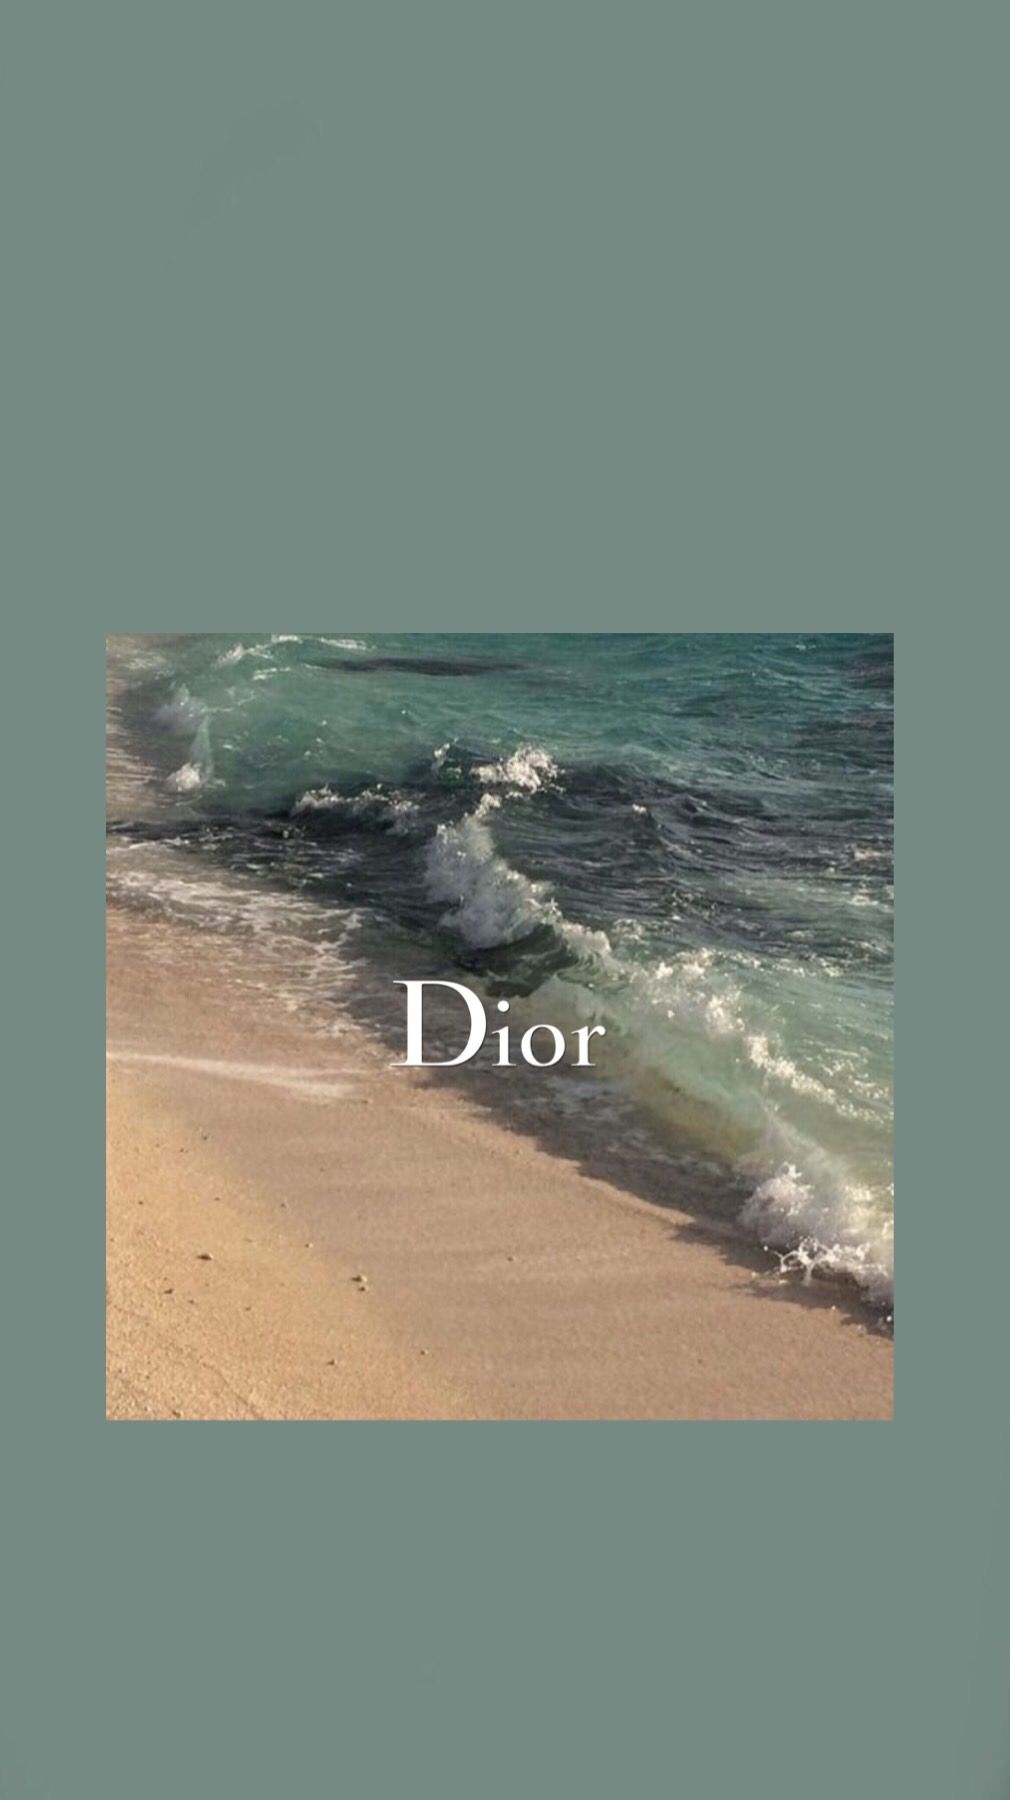 Dior wallpaper I made for my phone! - Dior